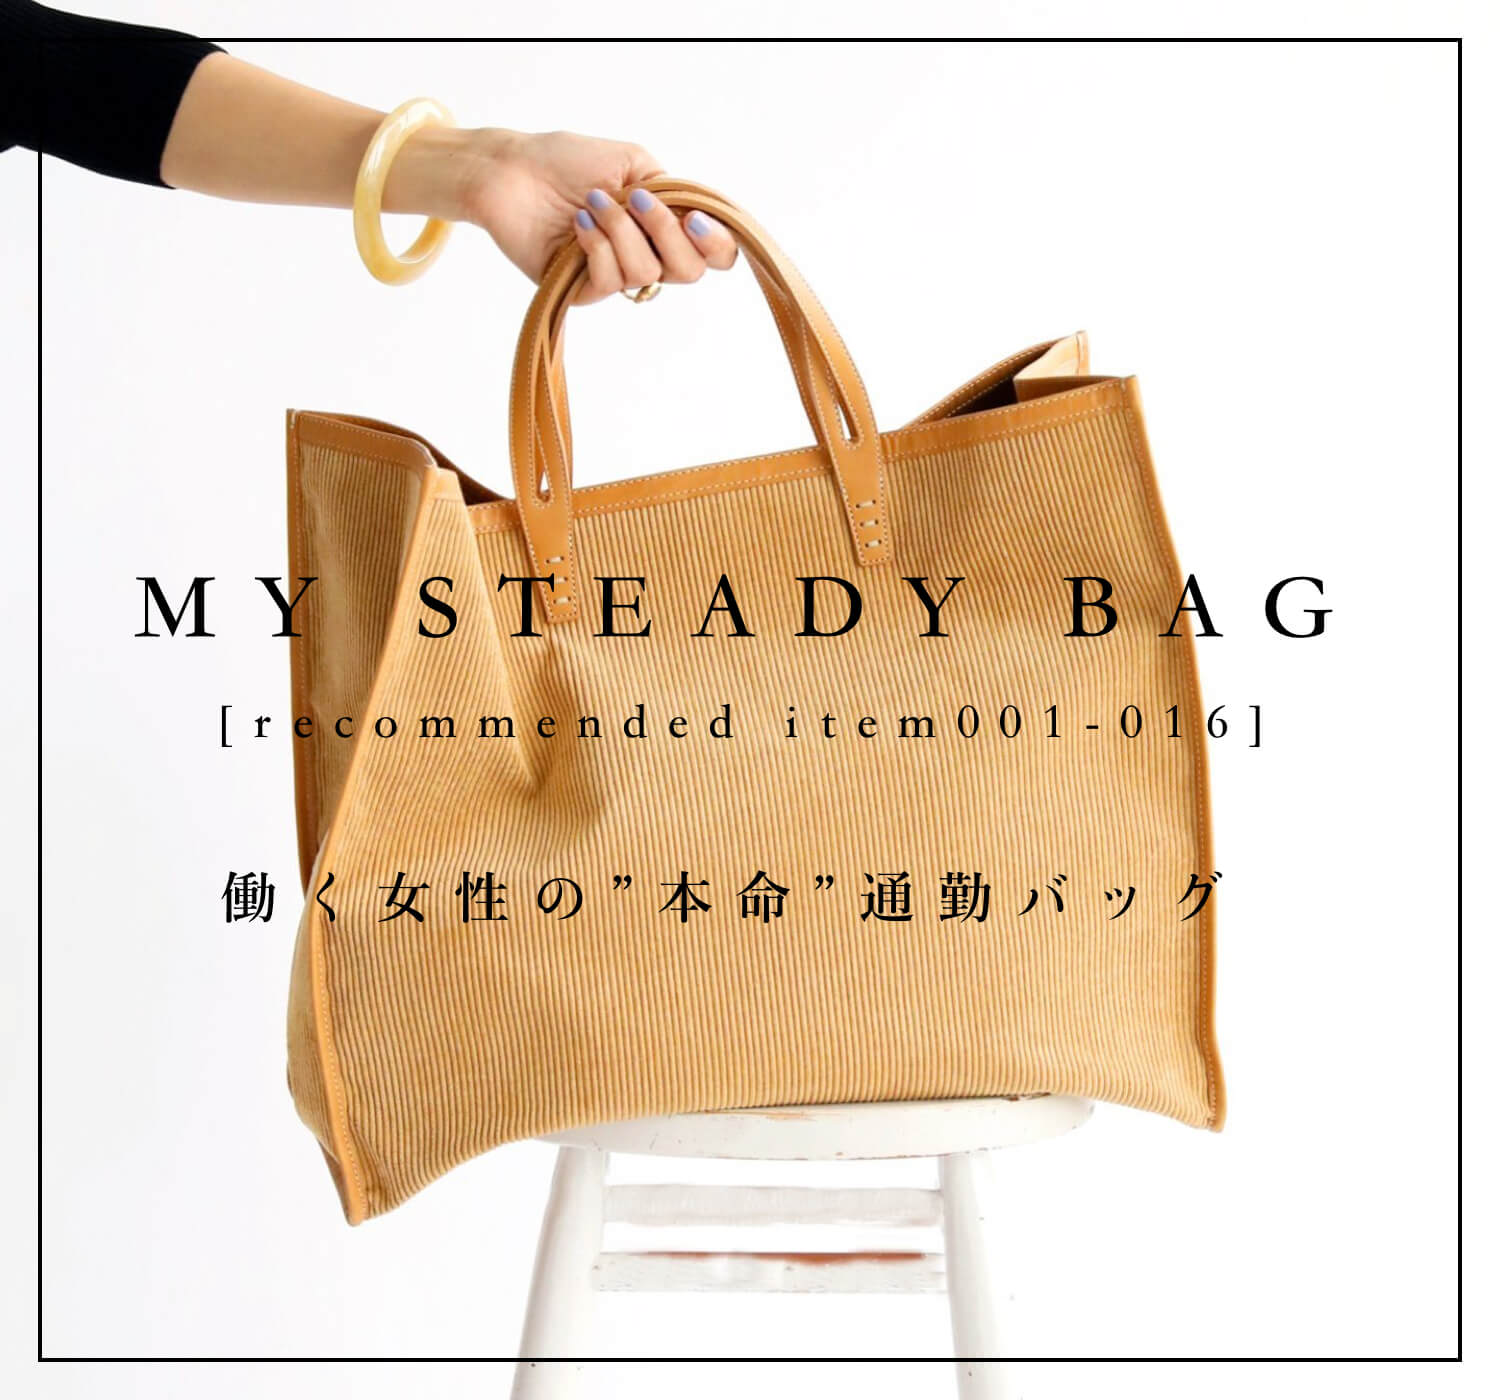 My Steady Bag 働く女性の 本命 通勤バッグ Baycrew S Store